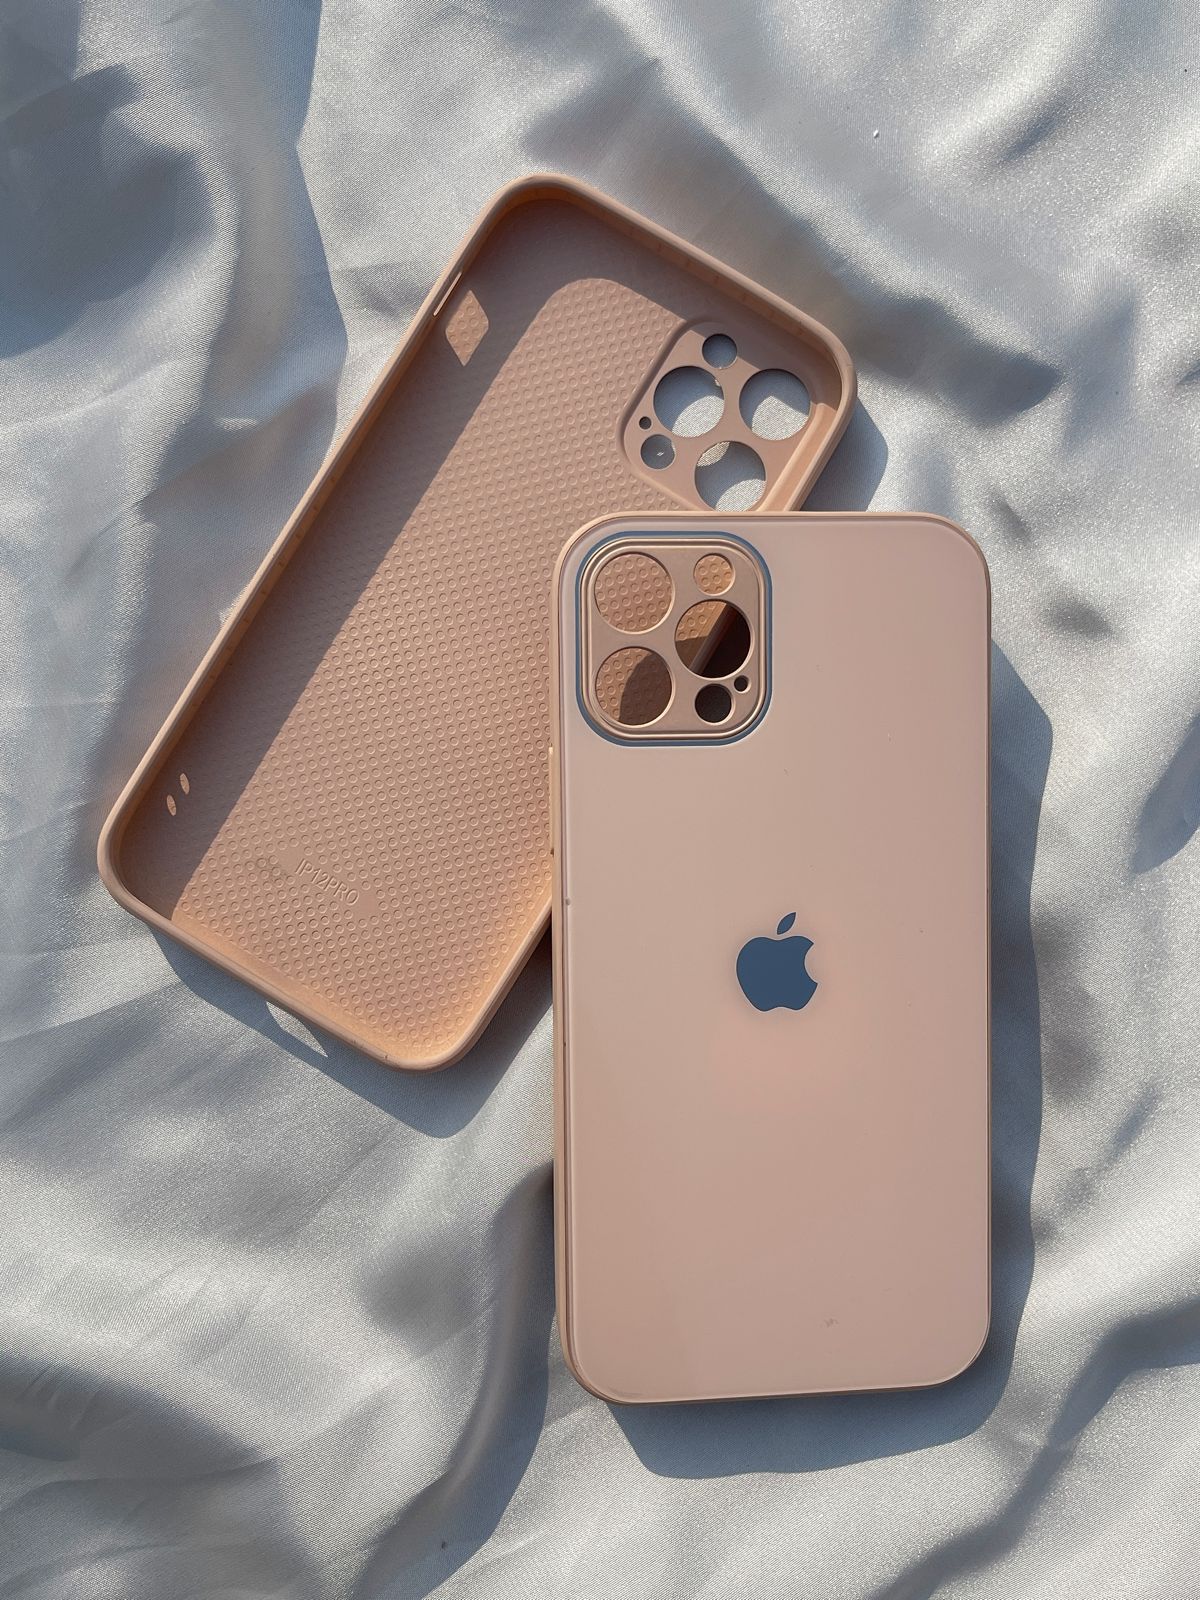 iPhone "12 Pro" Tempered Glass Case "Chrome"